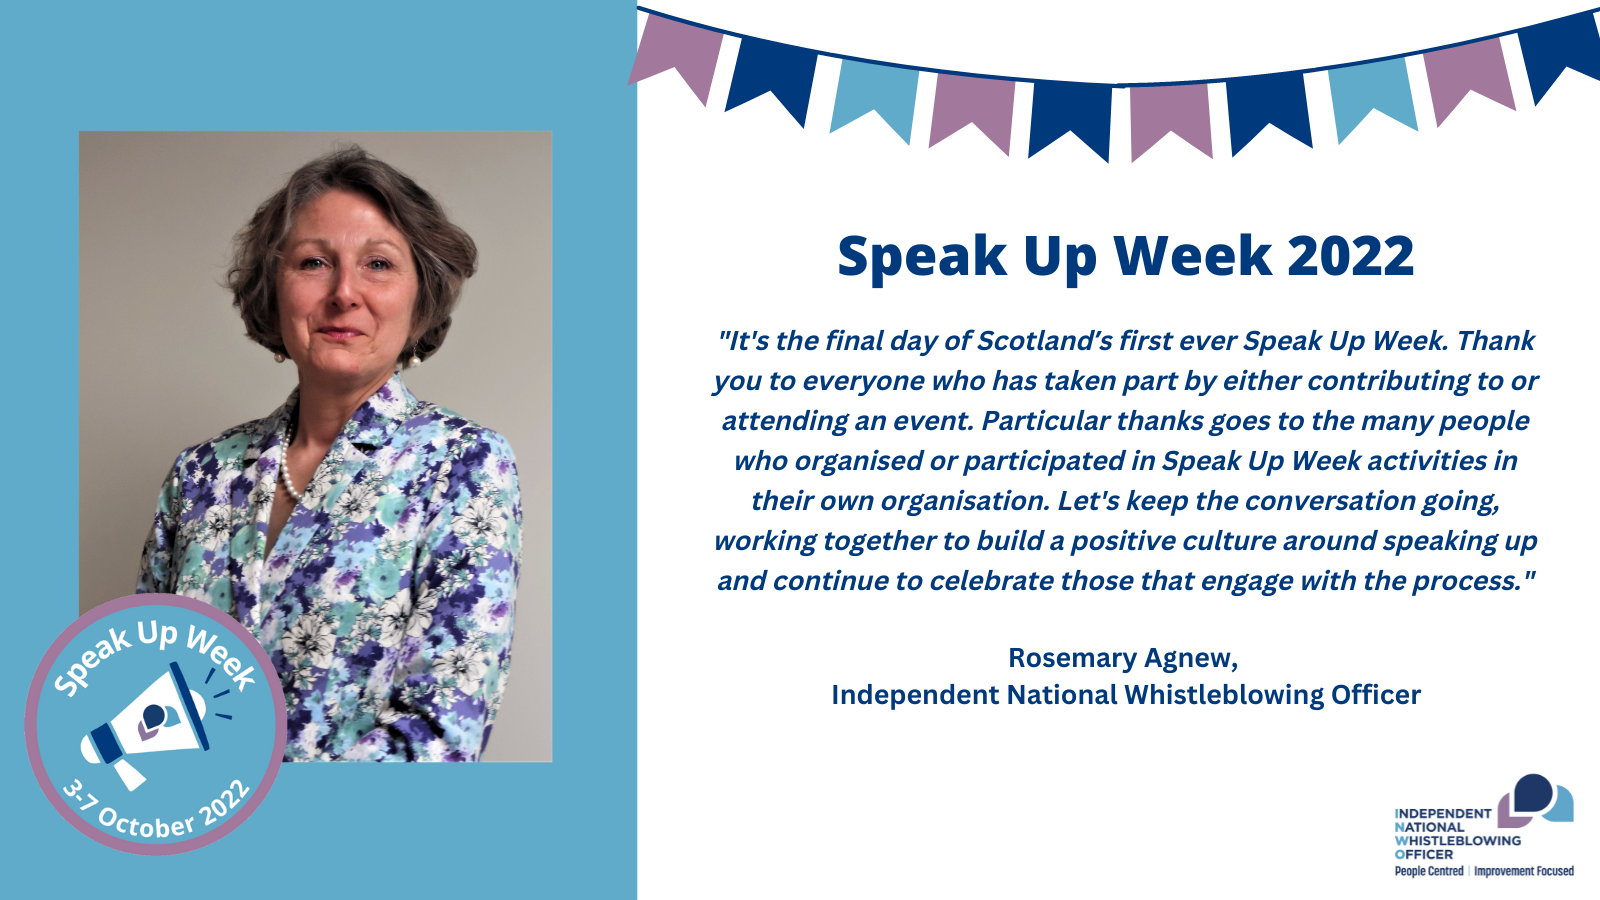 "It's the final day of Scotland’s first ever Speak Up Week. Thank you to everyone who has taken part by either contributing to or attending an event. Particular thanks goes to the many people who organised or participated in Speak Up Week activities in their own organisation. Let's keep the conversation going, working together to build a positive culture around speaking up and continue to celebrate those that engage with the process."